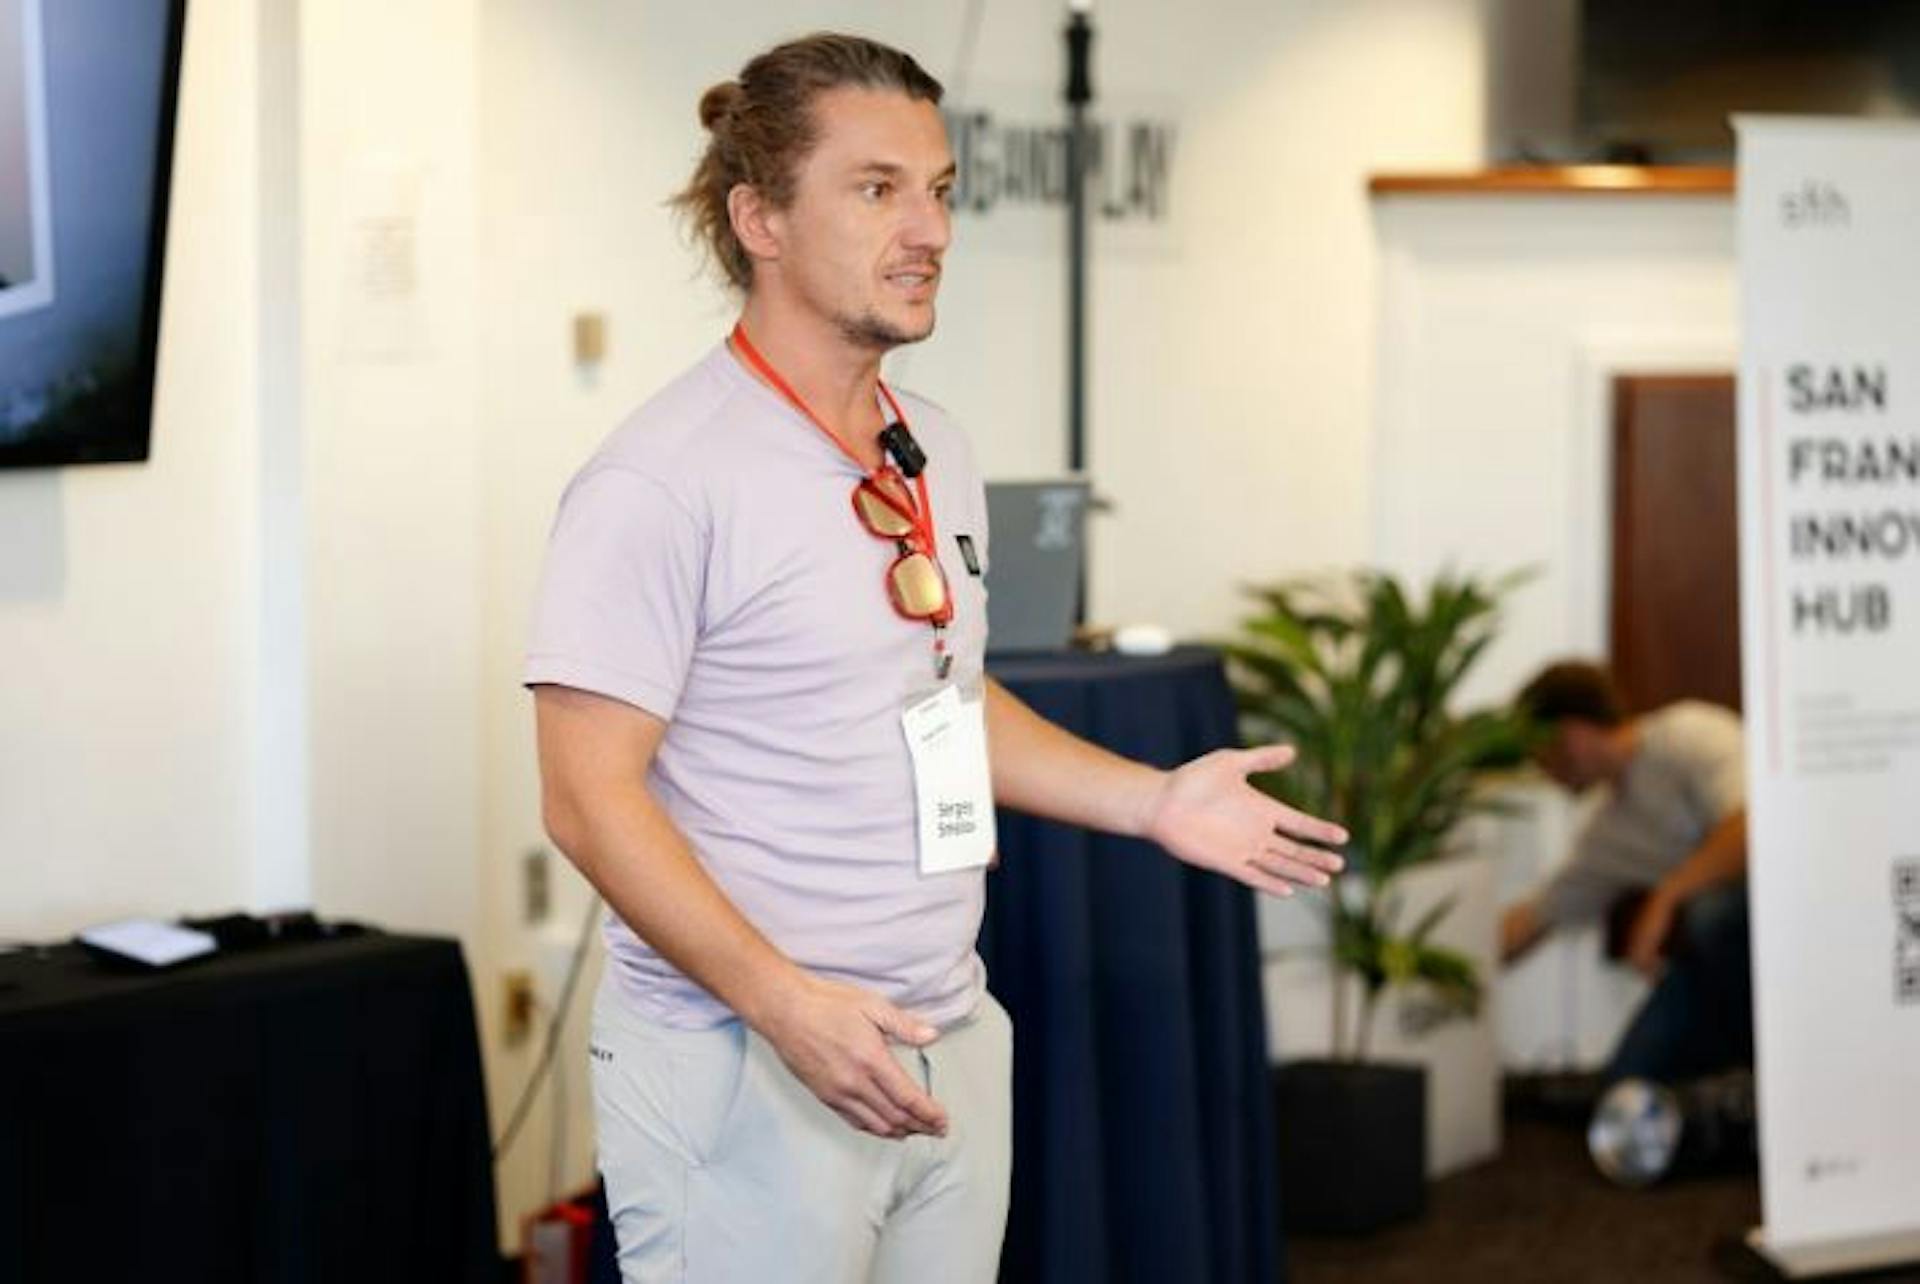 featured image - Sergei Smelov, Founder of Boostra, Shares the Latest Technologies in Microfinancing